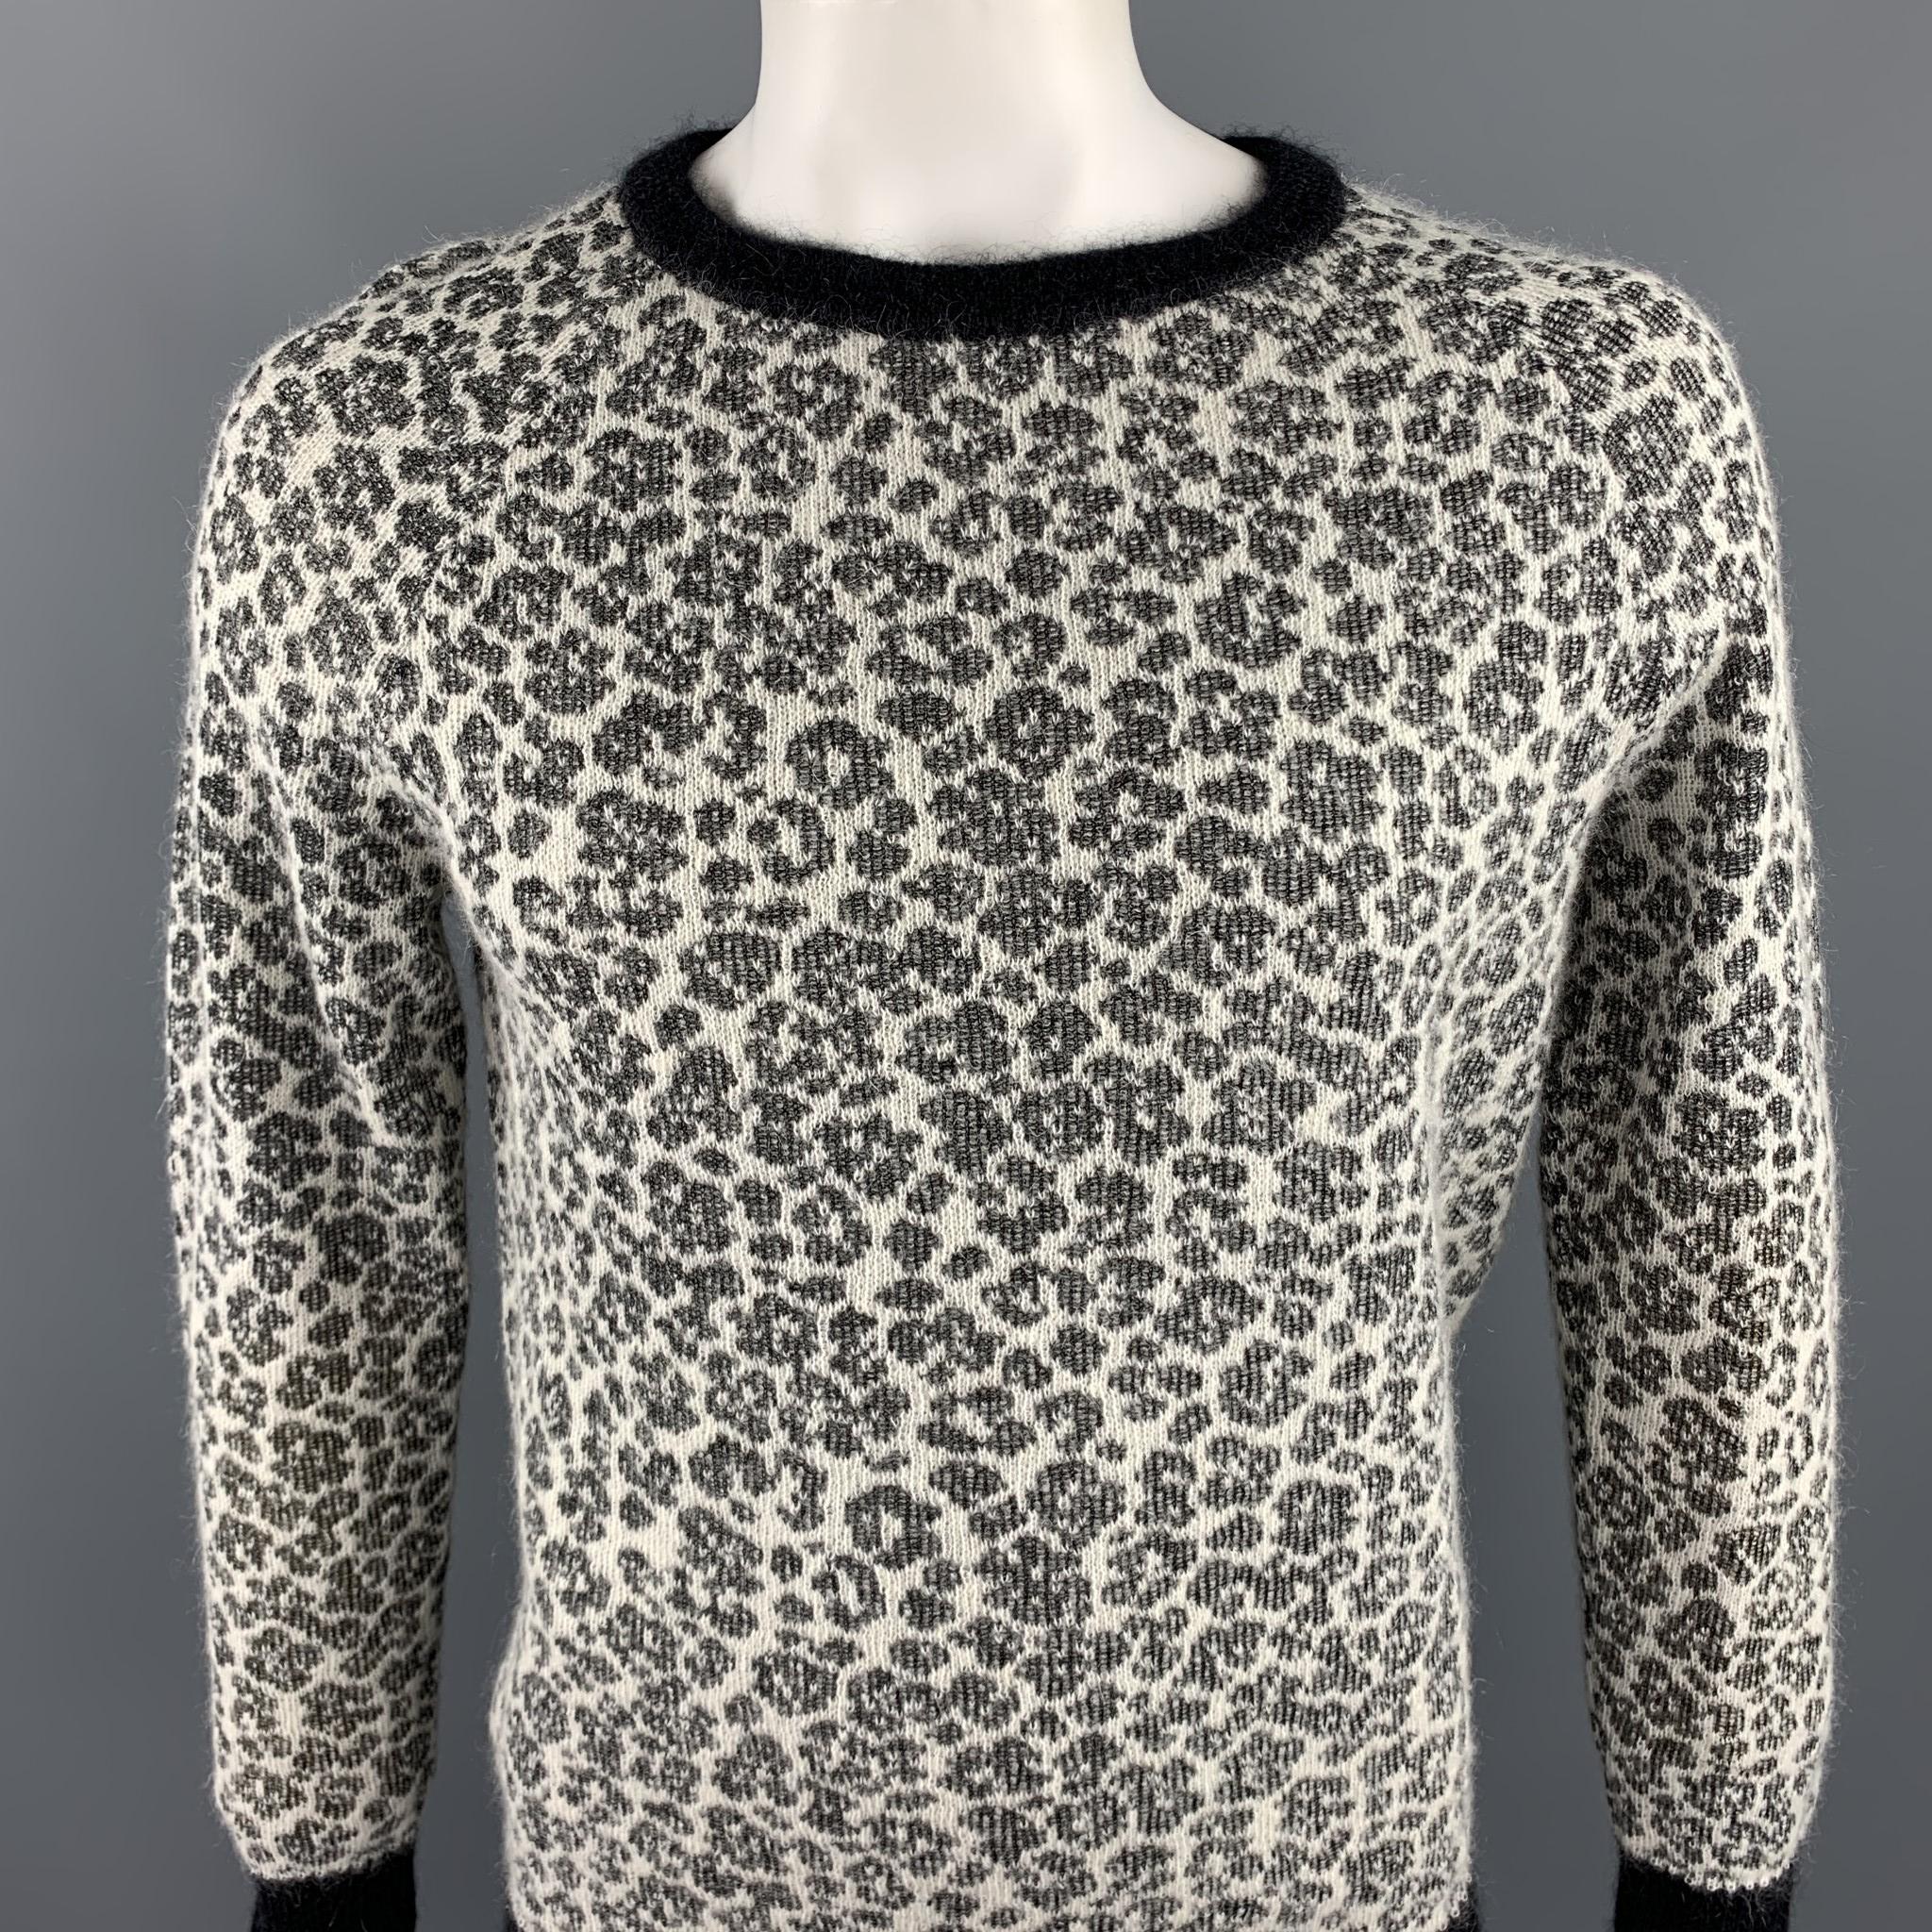 SAINT LAURENT sweater coms in a black & white leopard print mohair blend featuring a ribbed loose neckline. Made in Italy.

Excellent Pre-Owned Condition.
Marked: L

Measurements:

Shoulder: 18 in. 
Chest: 40 in. 
Sleeve: 28 in. 
Length: 27 in. 